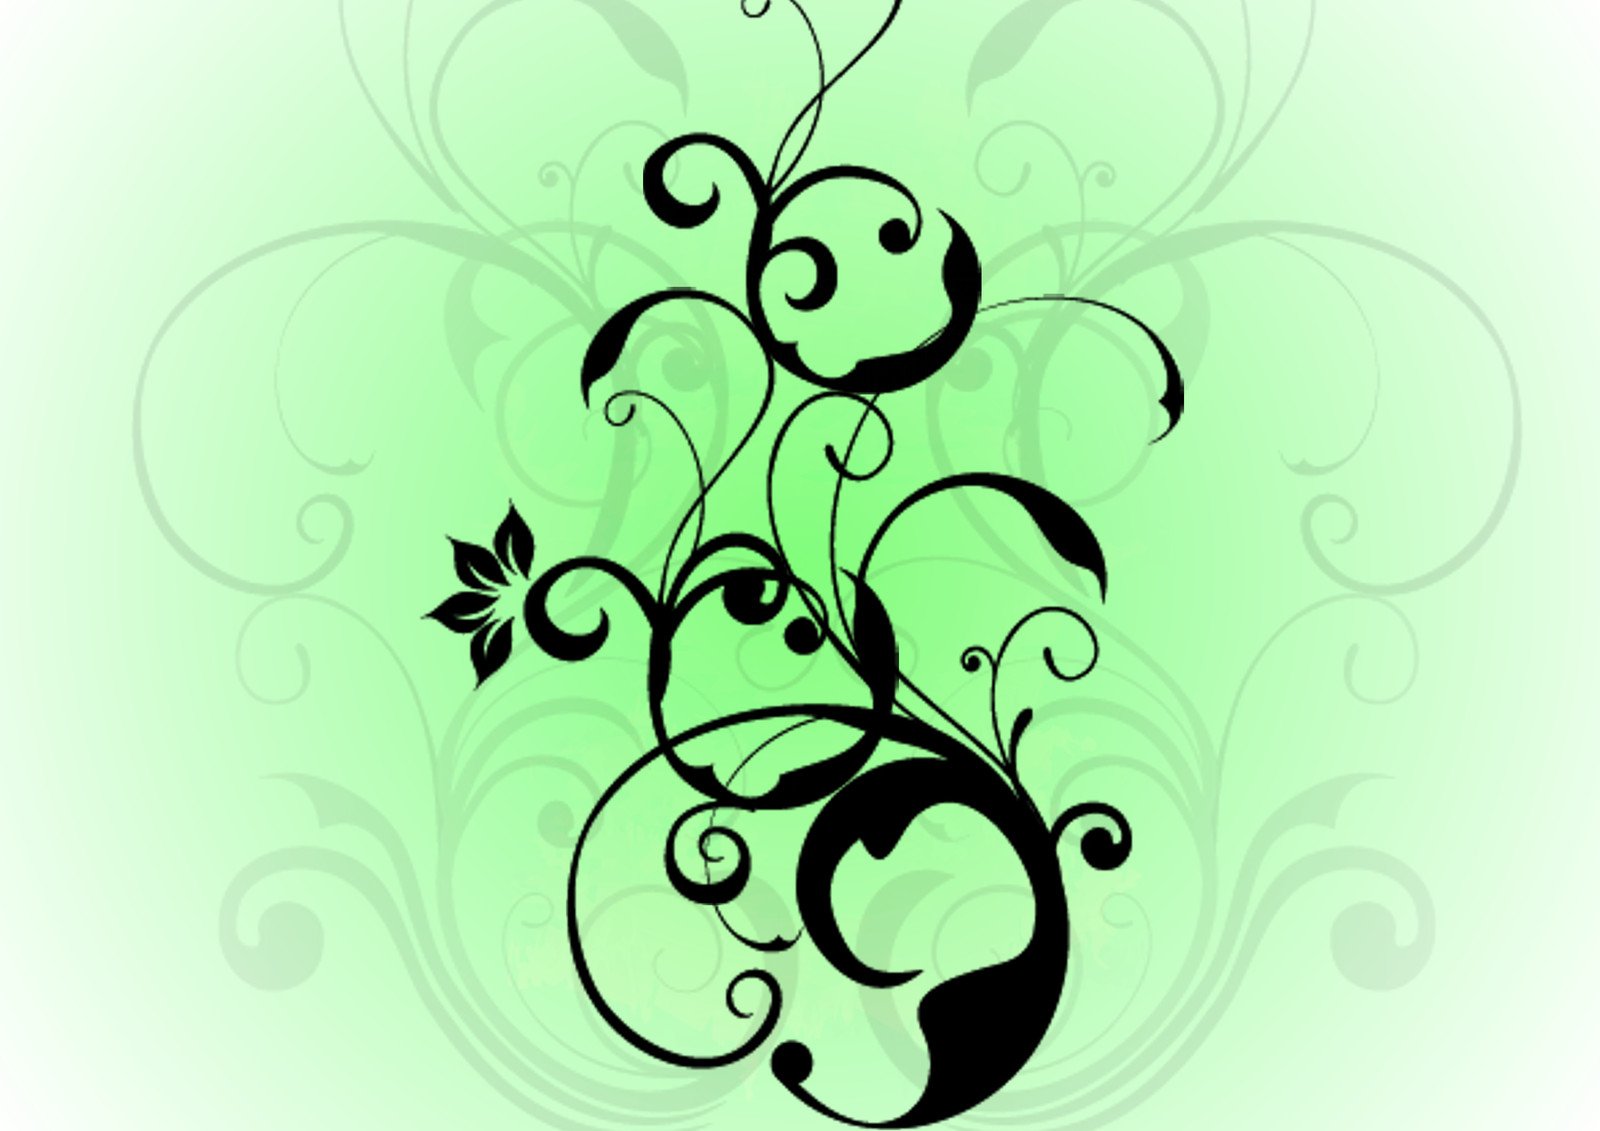 an abstract floral design with leaves and flowers